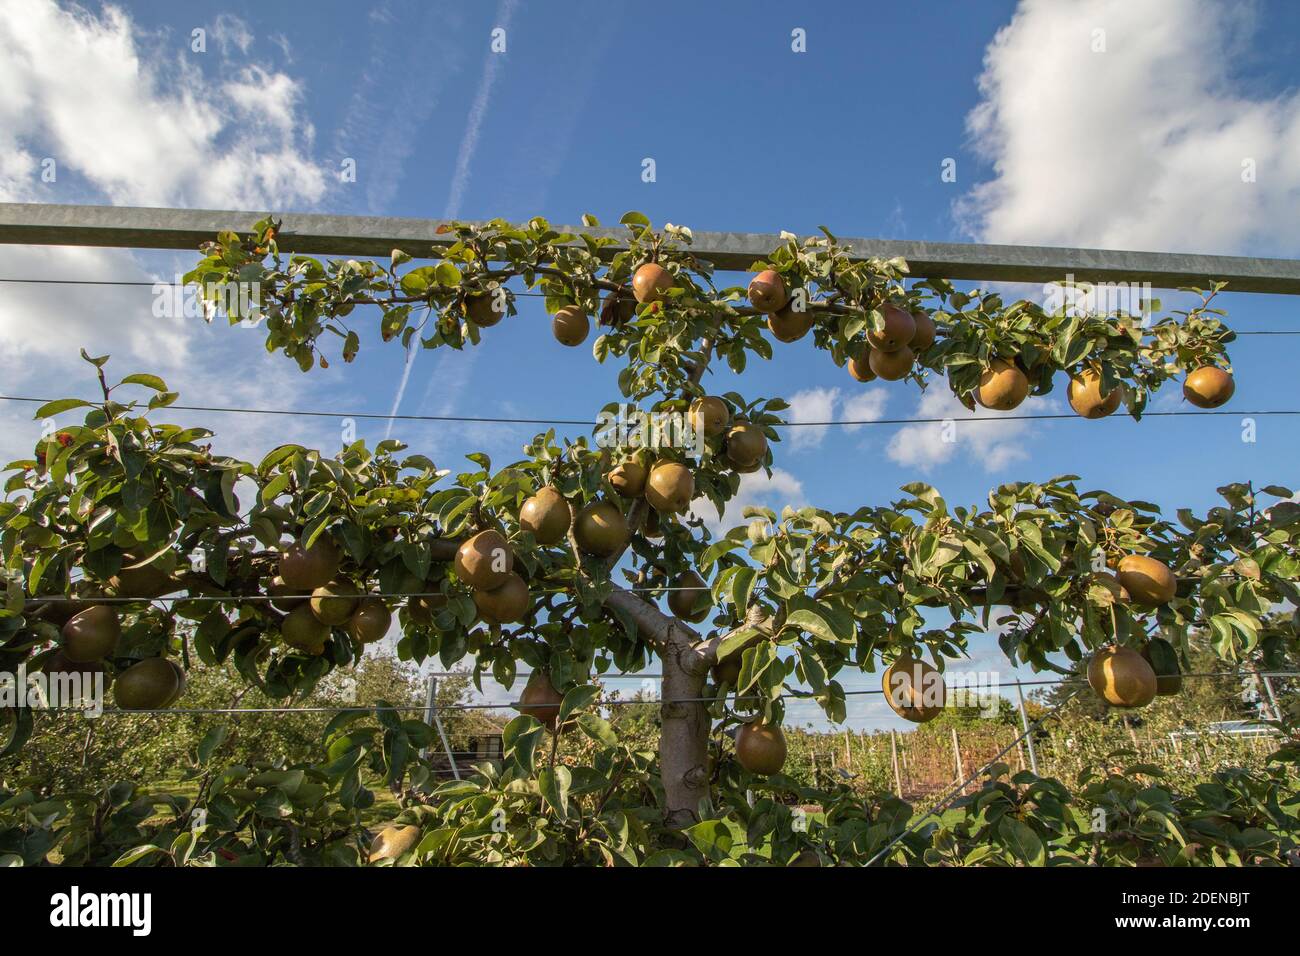 Pyrus communis 'Black Worcester' cooking pear growing on a trellis against a sunny blue sky Stock Photo